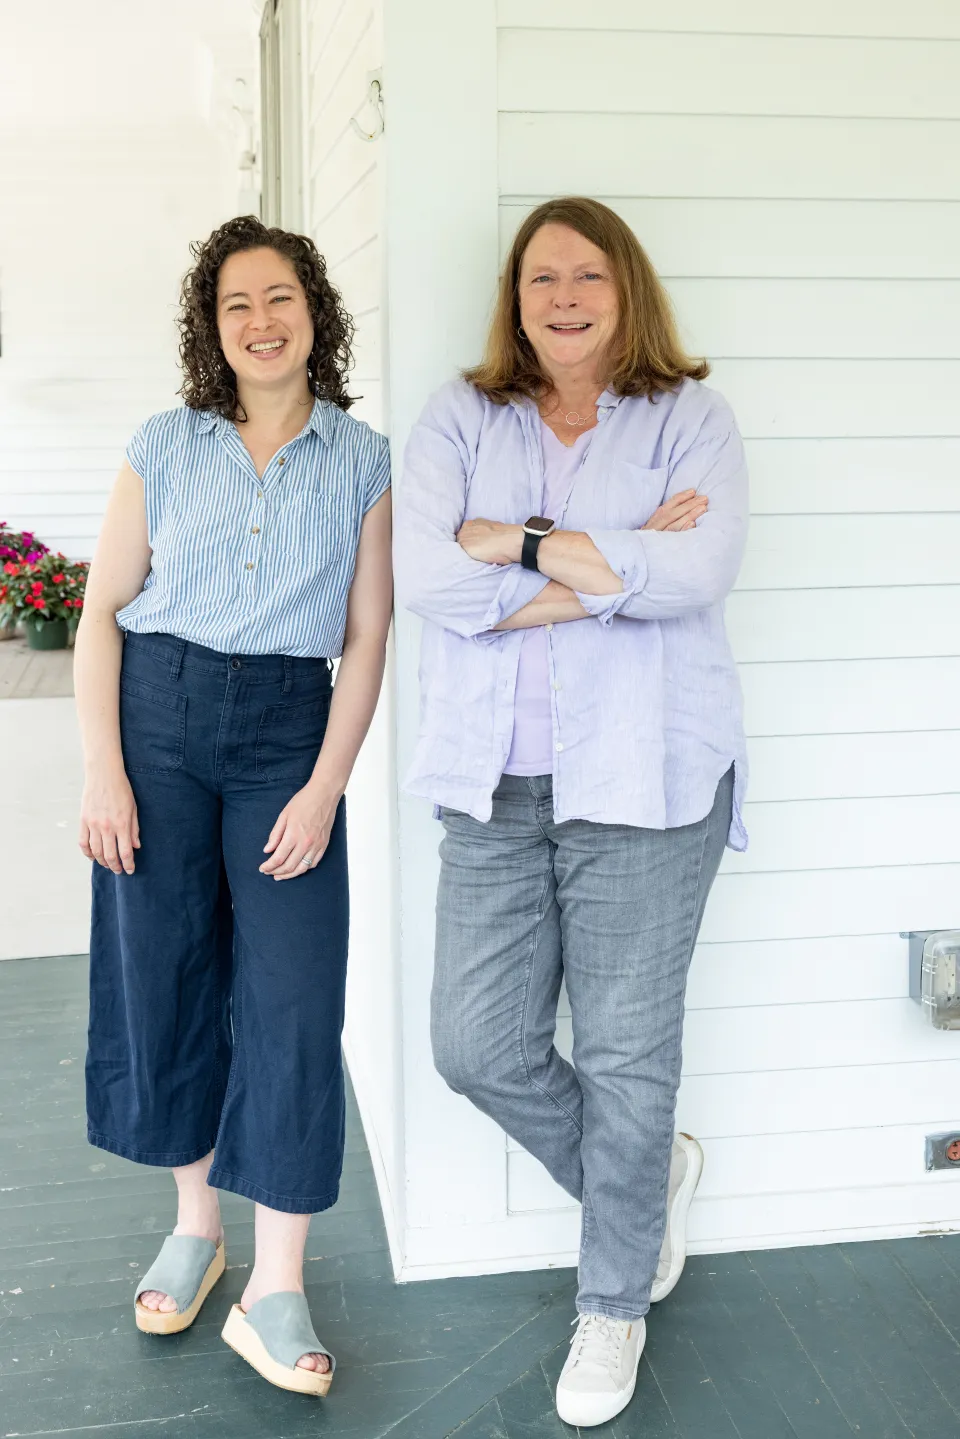 Suzanne Gottschang, the Kahn’s director and  professor of anthropology and East Asian studies, and Kathleen Pierce, assistant professor of art, pose together on a white porch